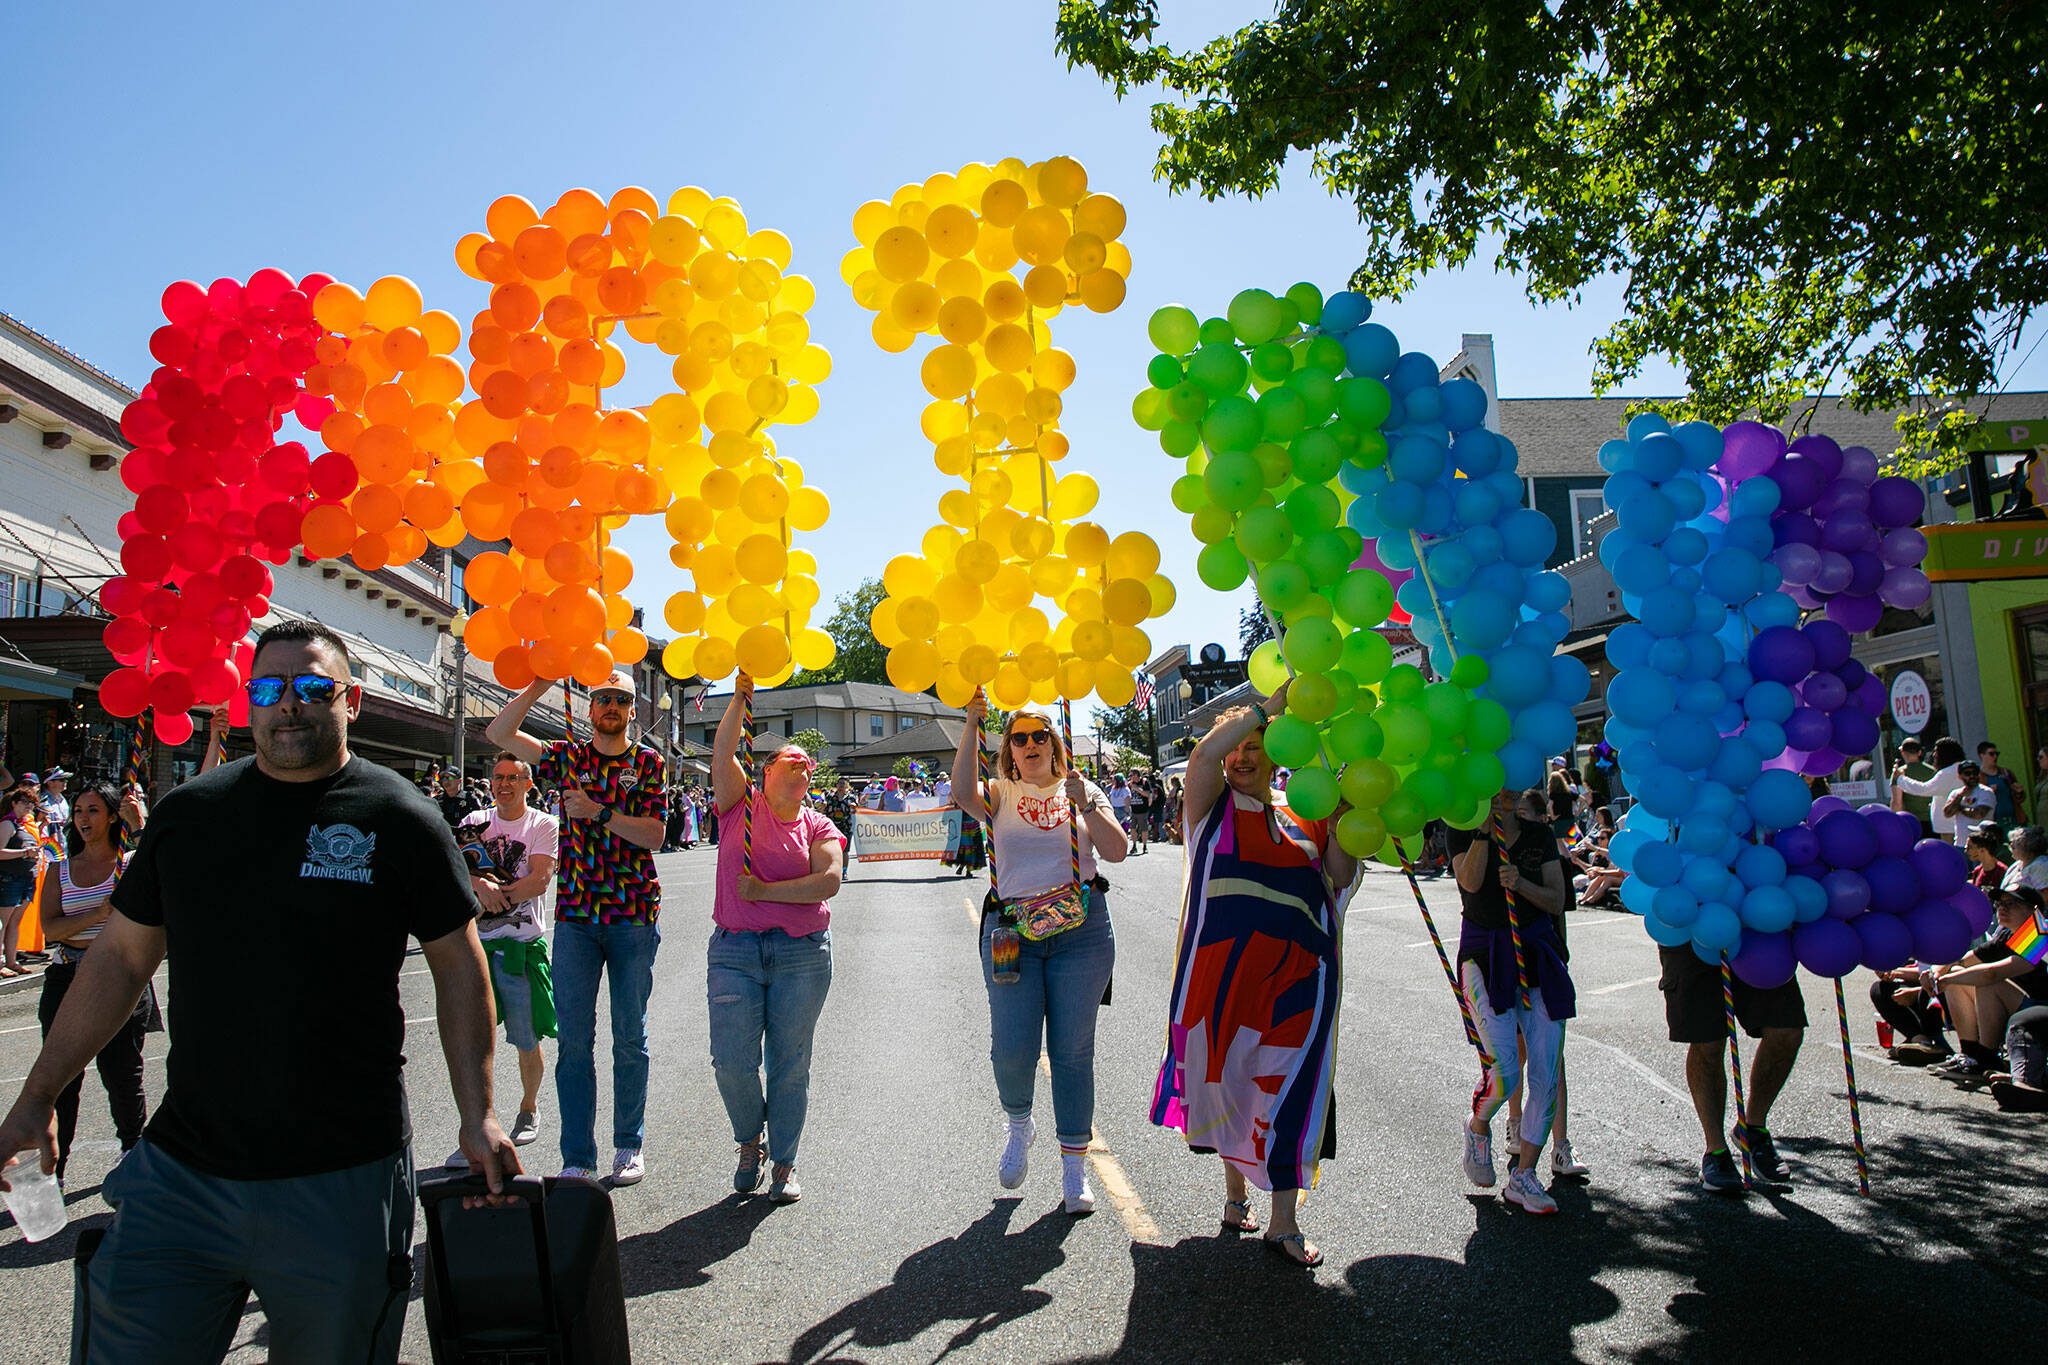 People begin parading down First Street with a giant balloon “PRIDE” during Snohomish’s inaugural Pride celebration on Saturday, June 3, 2023, in downtown Snohomish, Washington. (Ryan Berry / The Herald)